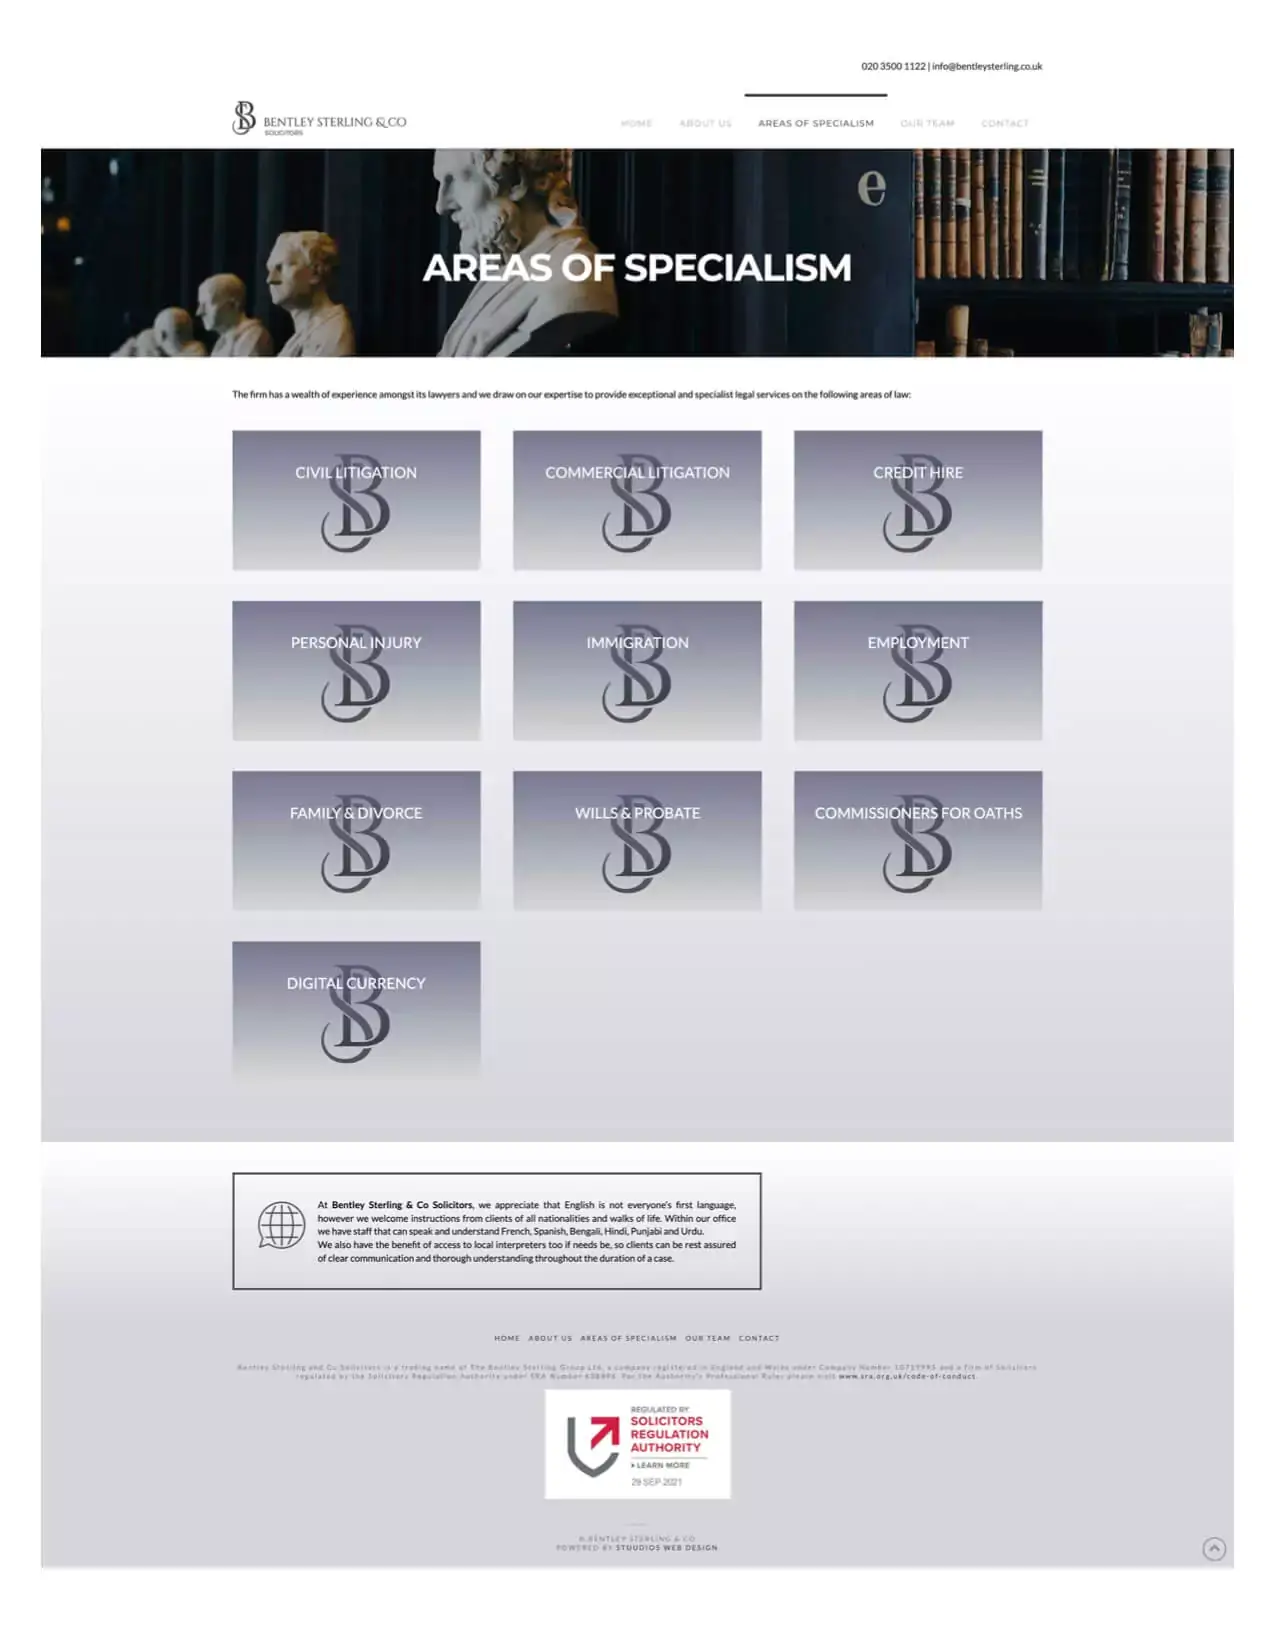 Old Bentley Sterling & Co Website - Areas of Specialism